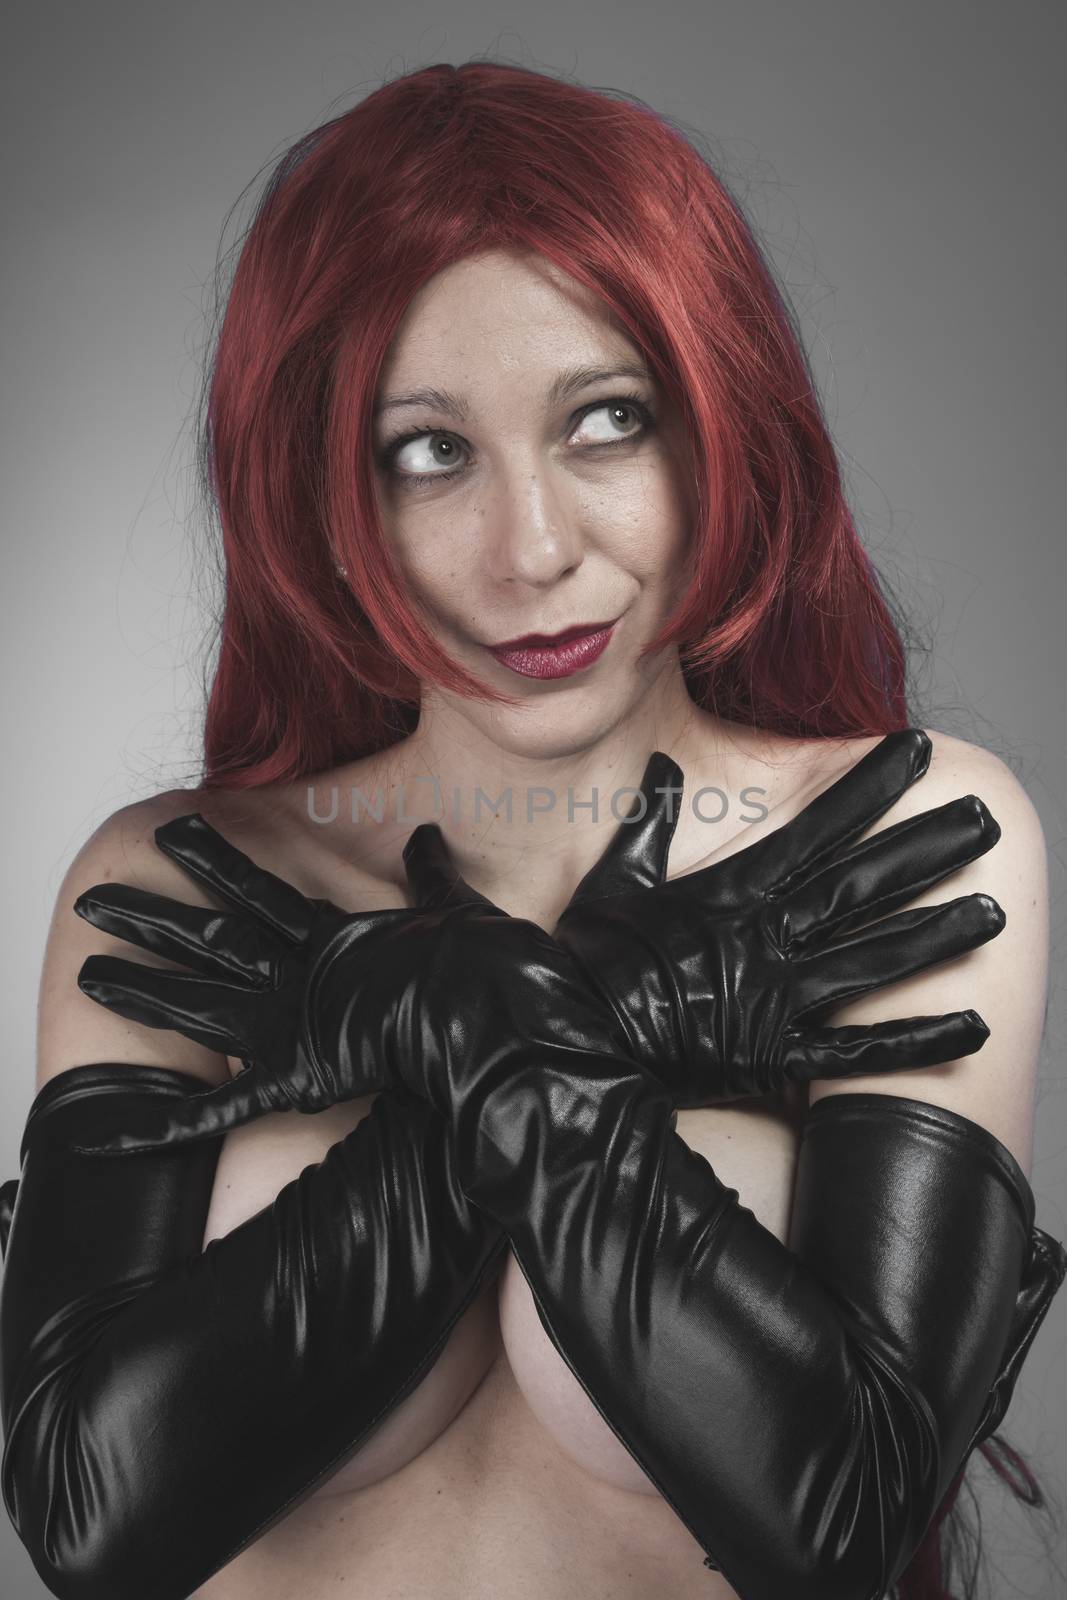 Female, redhead woman with black latex gloves, bare by FernandoCortes